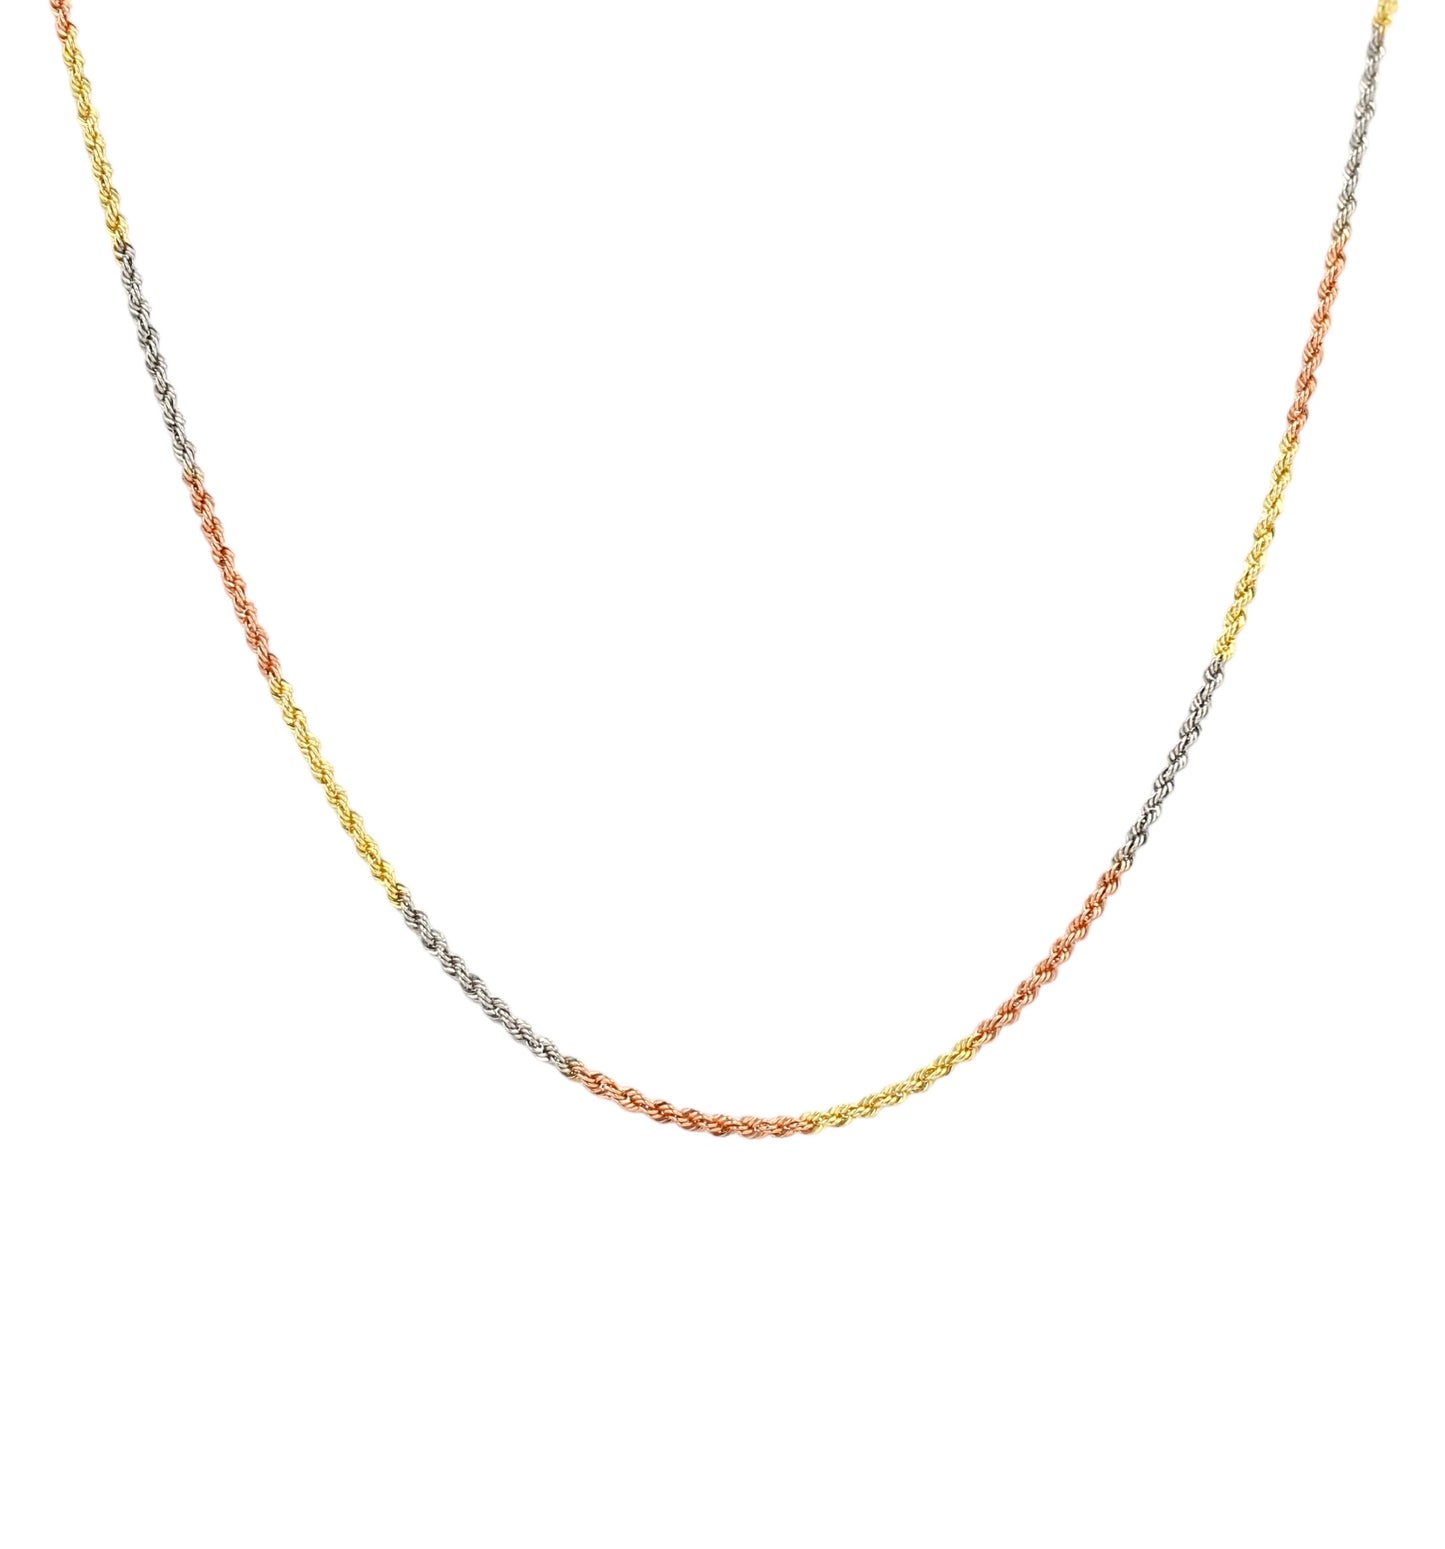 Gold 14k three color rope chain